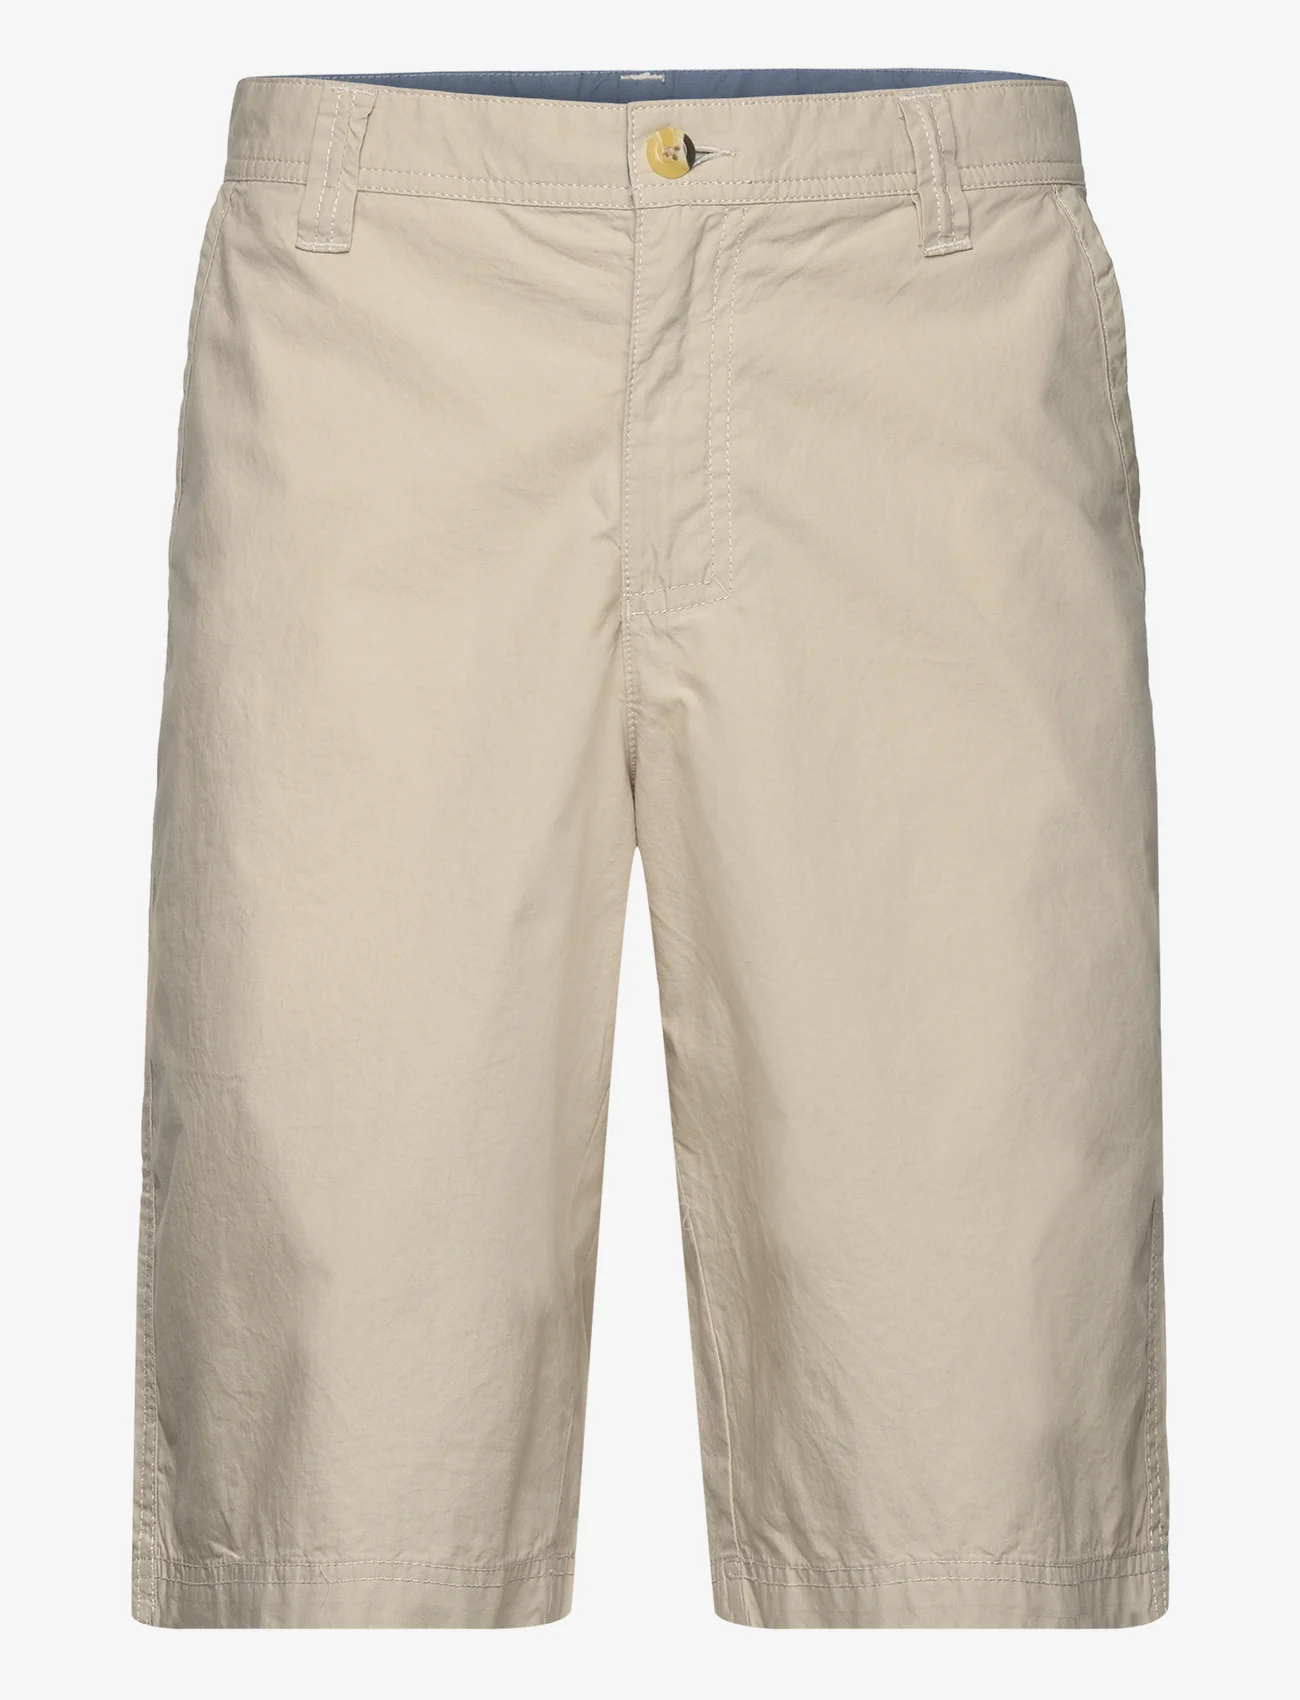 Columbia Sportswear - Washed Out Short - outdoorshorts - fossil - 0